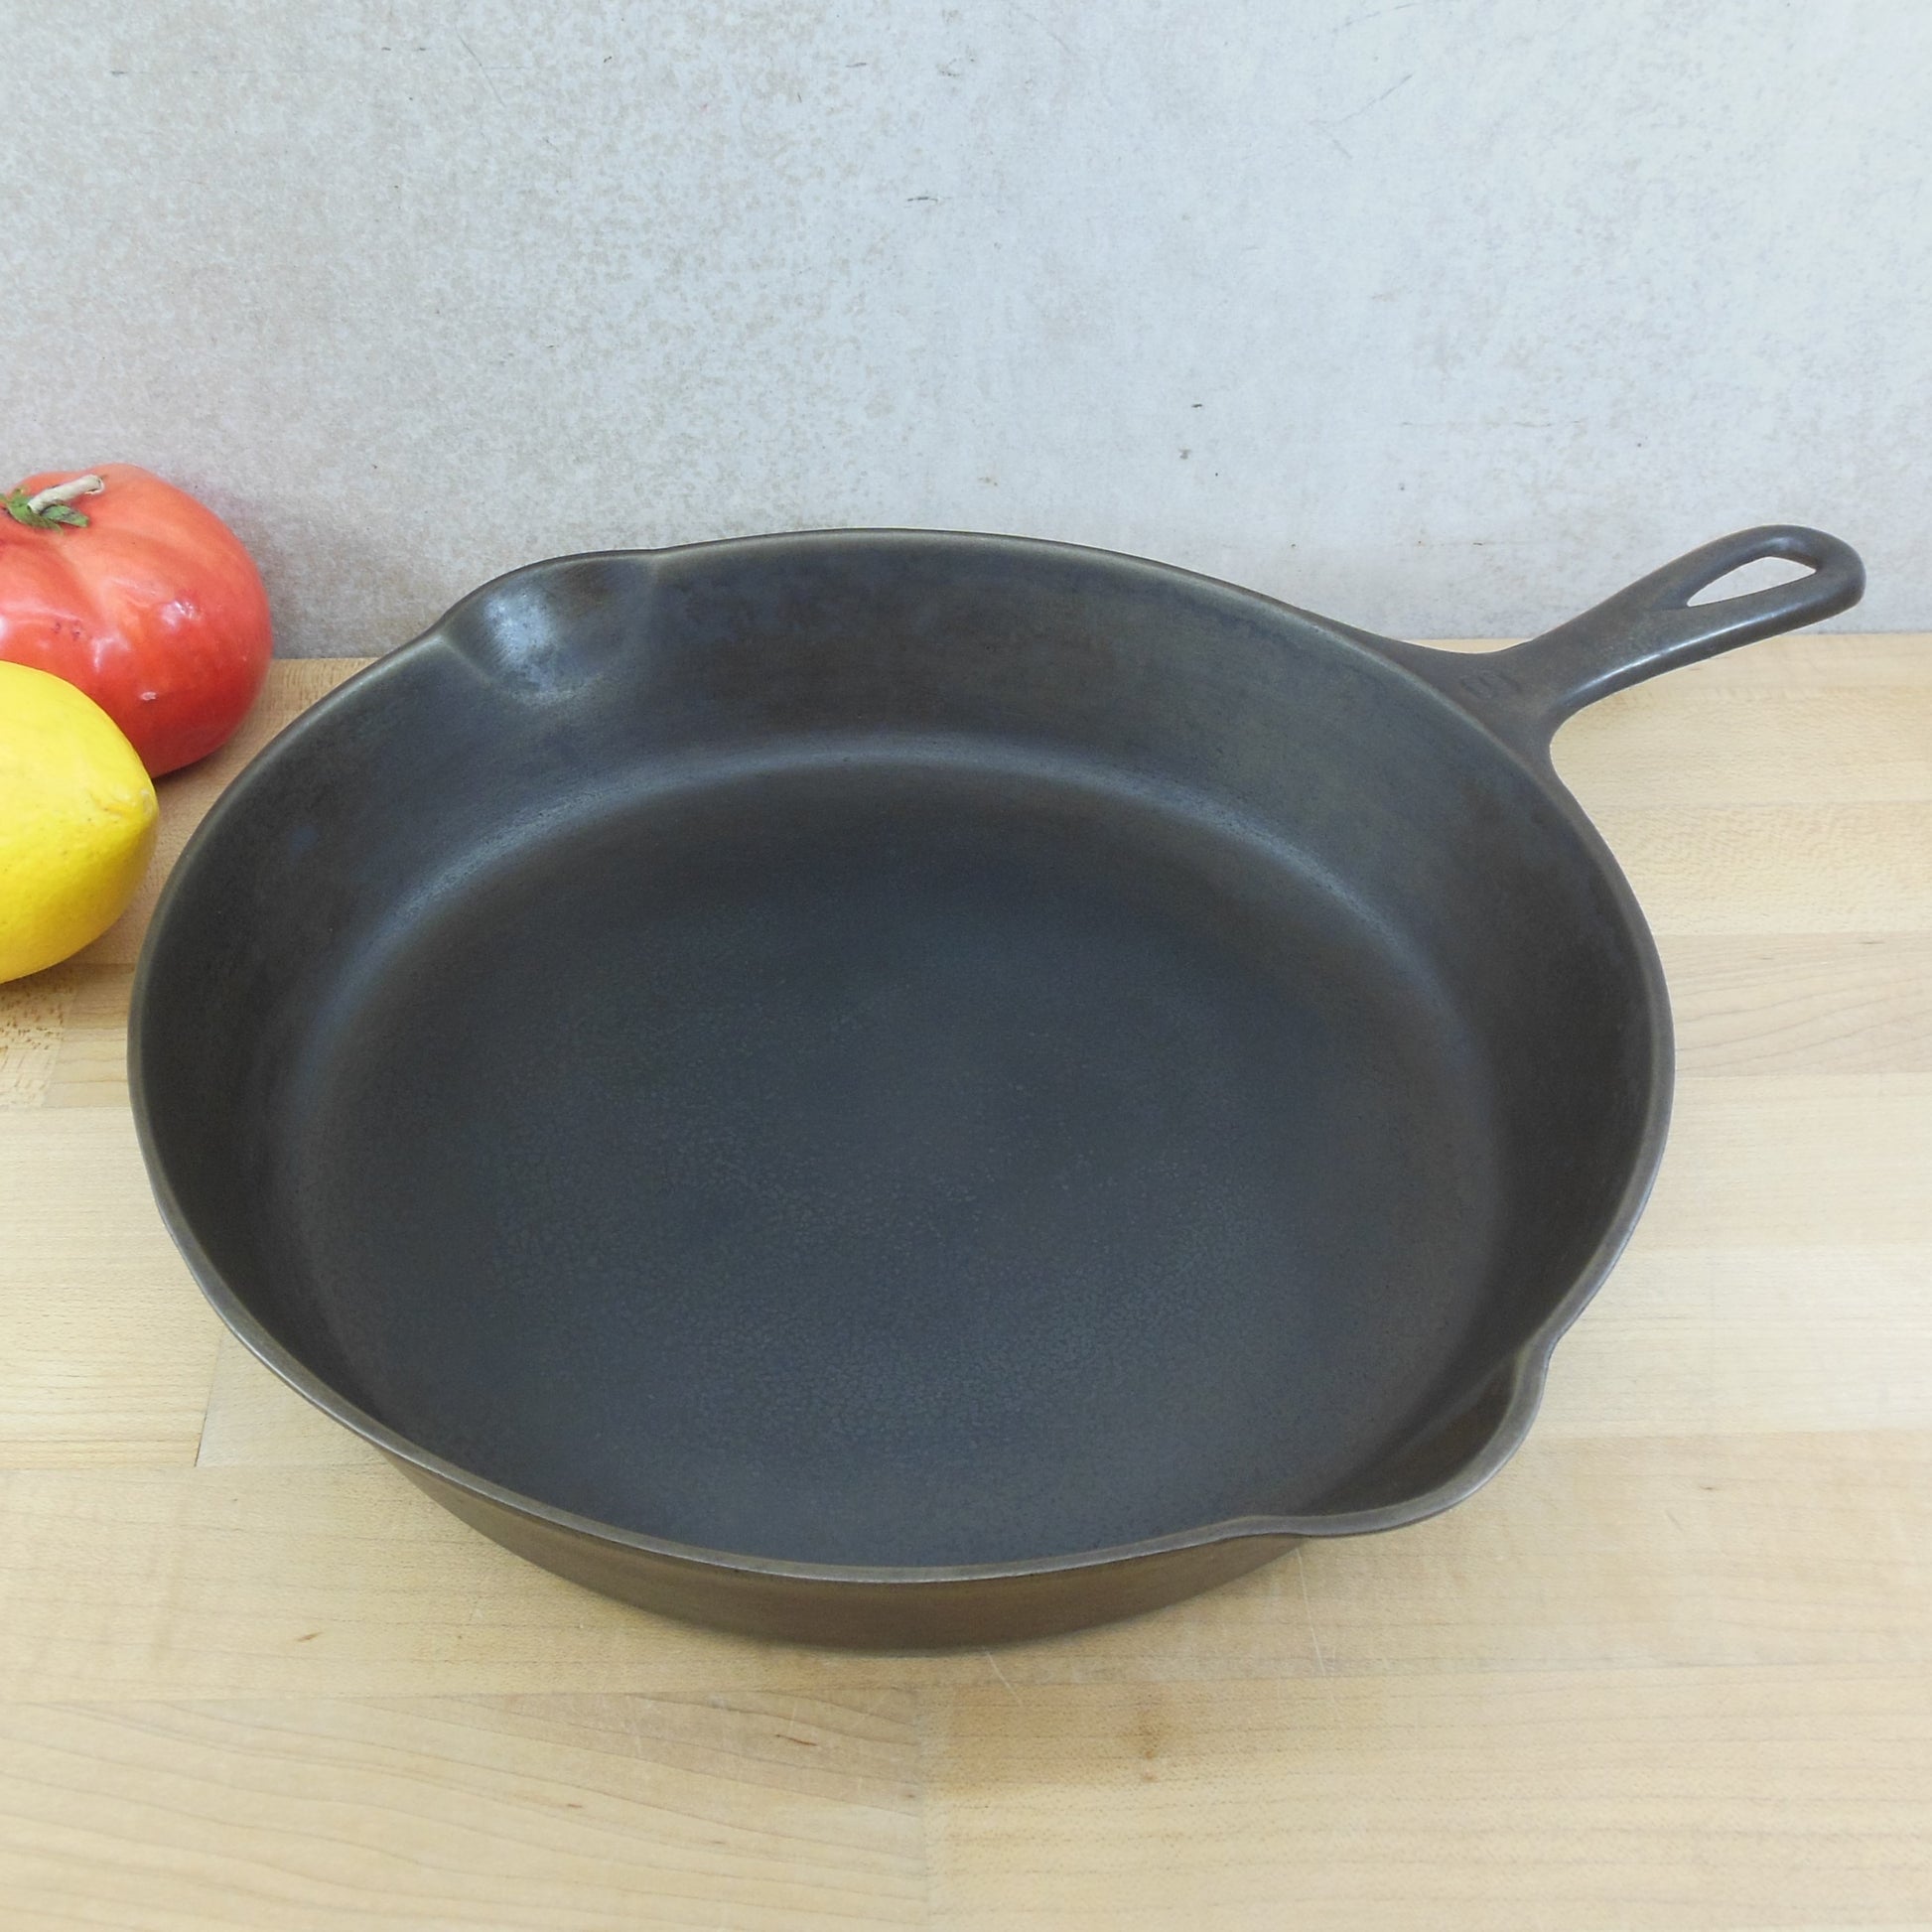 Vintage Cast Iron Skillet Pan #10 12 7/16 Fire Ring USA Chip